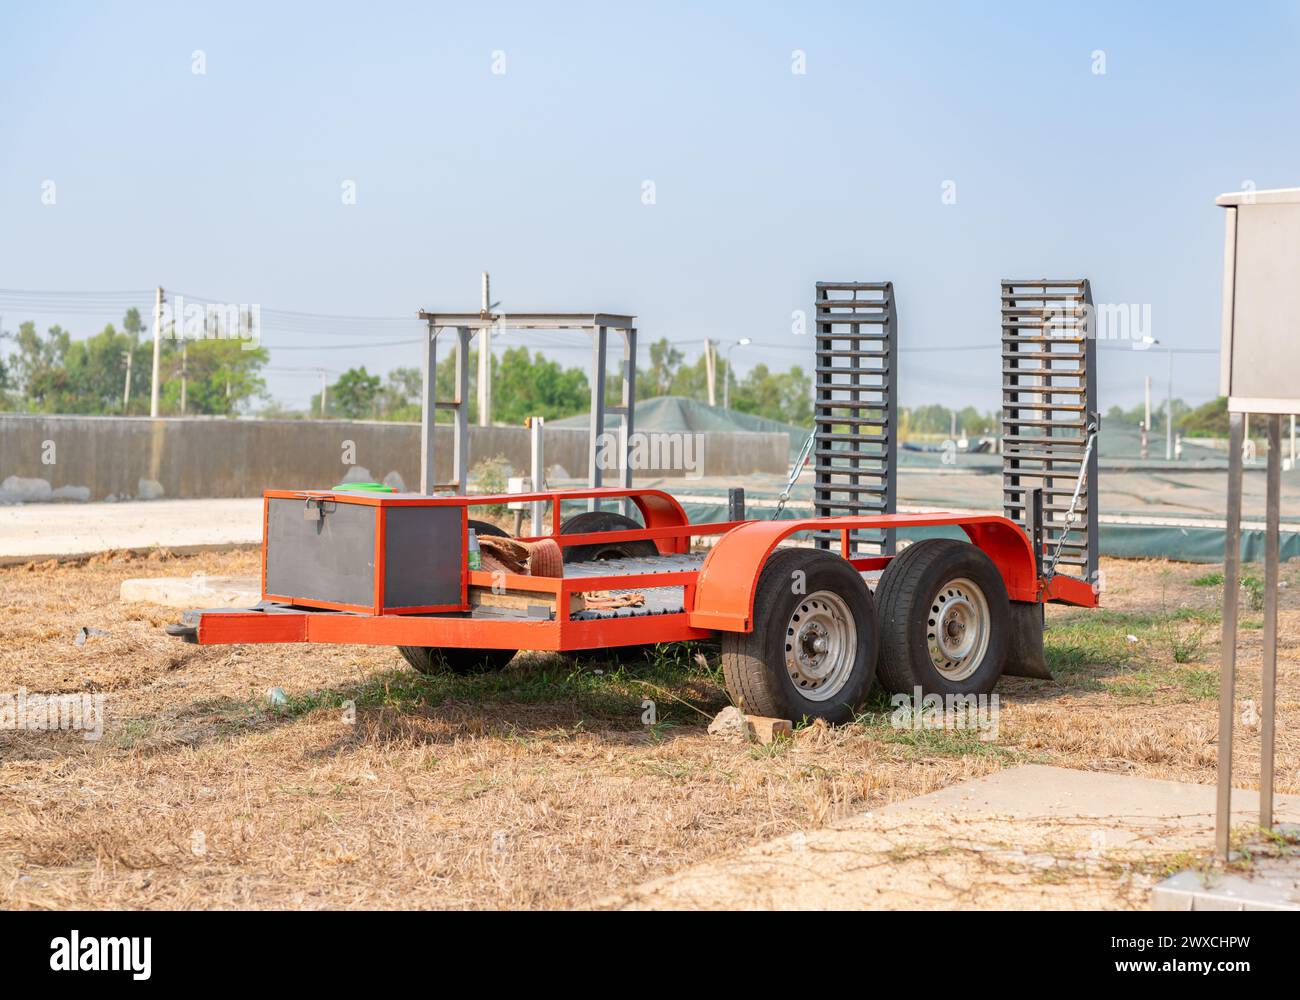 Trailer flatbed platform for transporting machinery in factory. Stock Photo